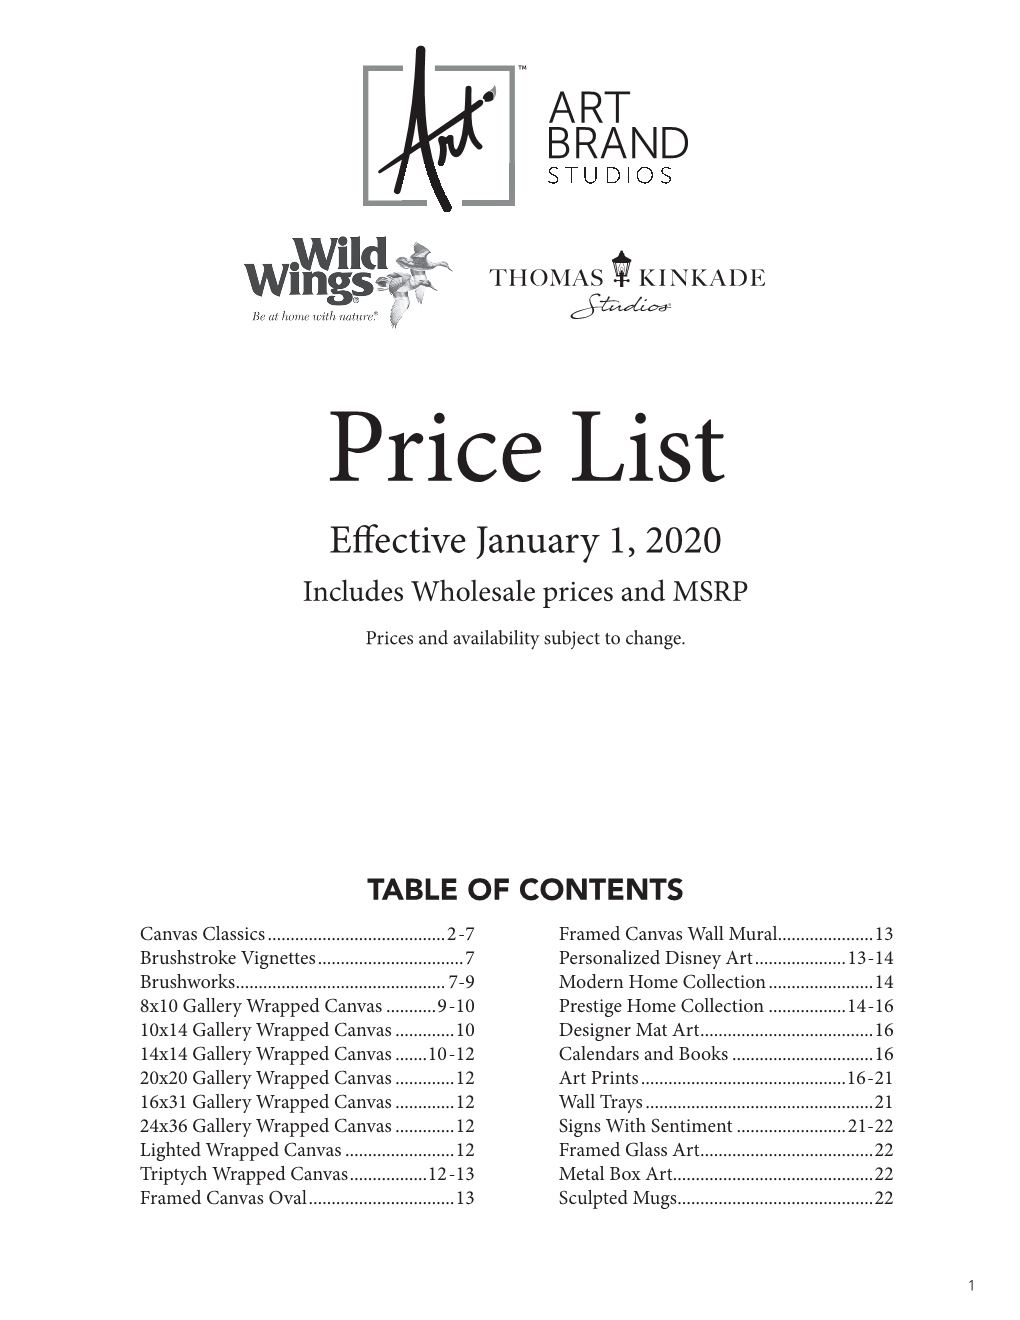 Price List E Ective January 1, 2020 Includes Wholesale Prices and MSRP Prices and Availability Subject to Change